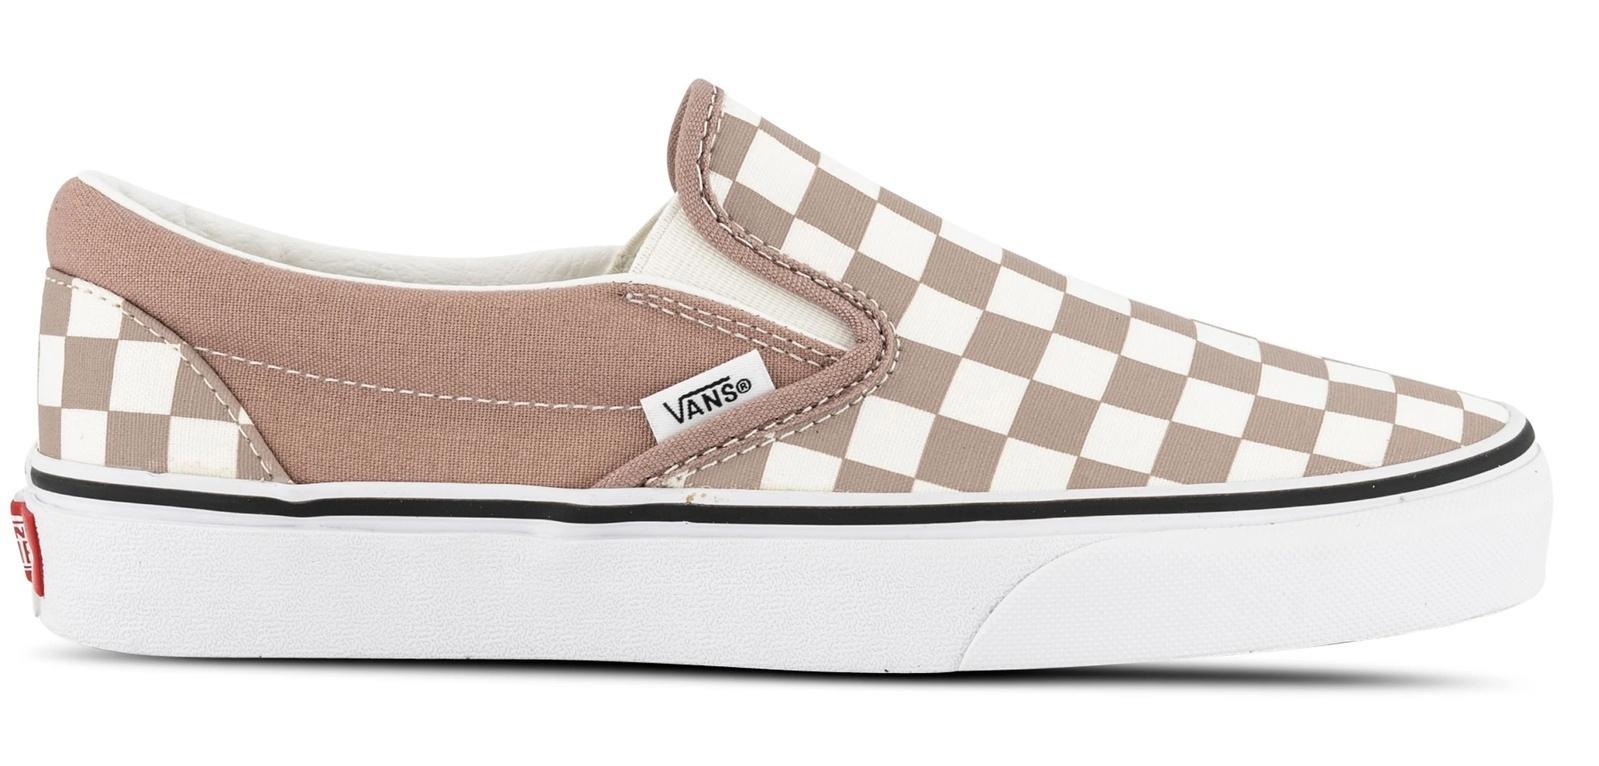 Vans Classic Slip On Canvas Sneaker Shoes Chess Check - Etherea/True White - US 5